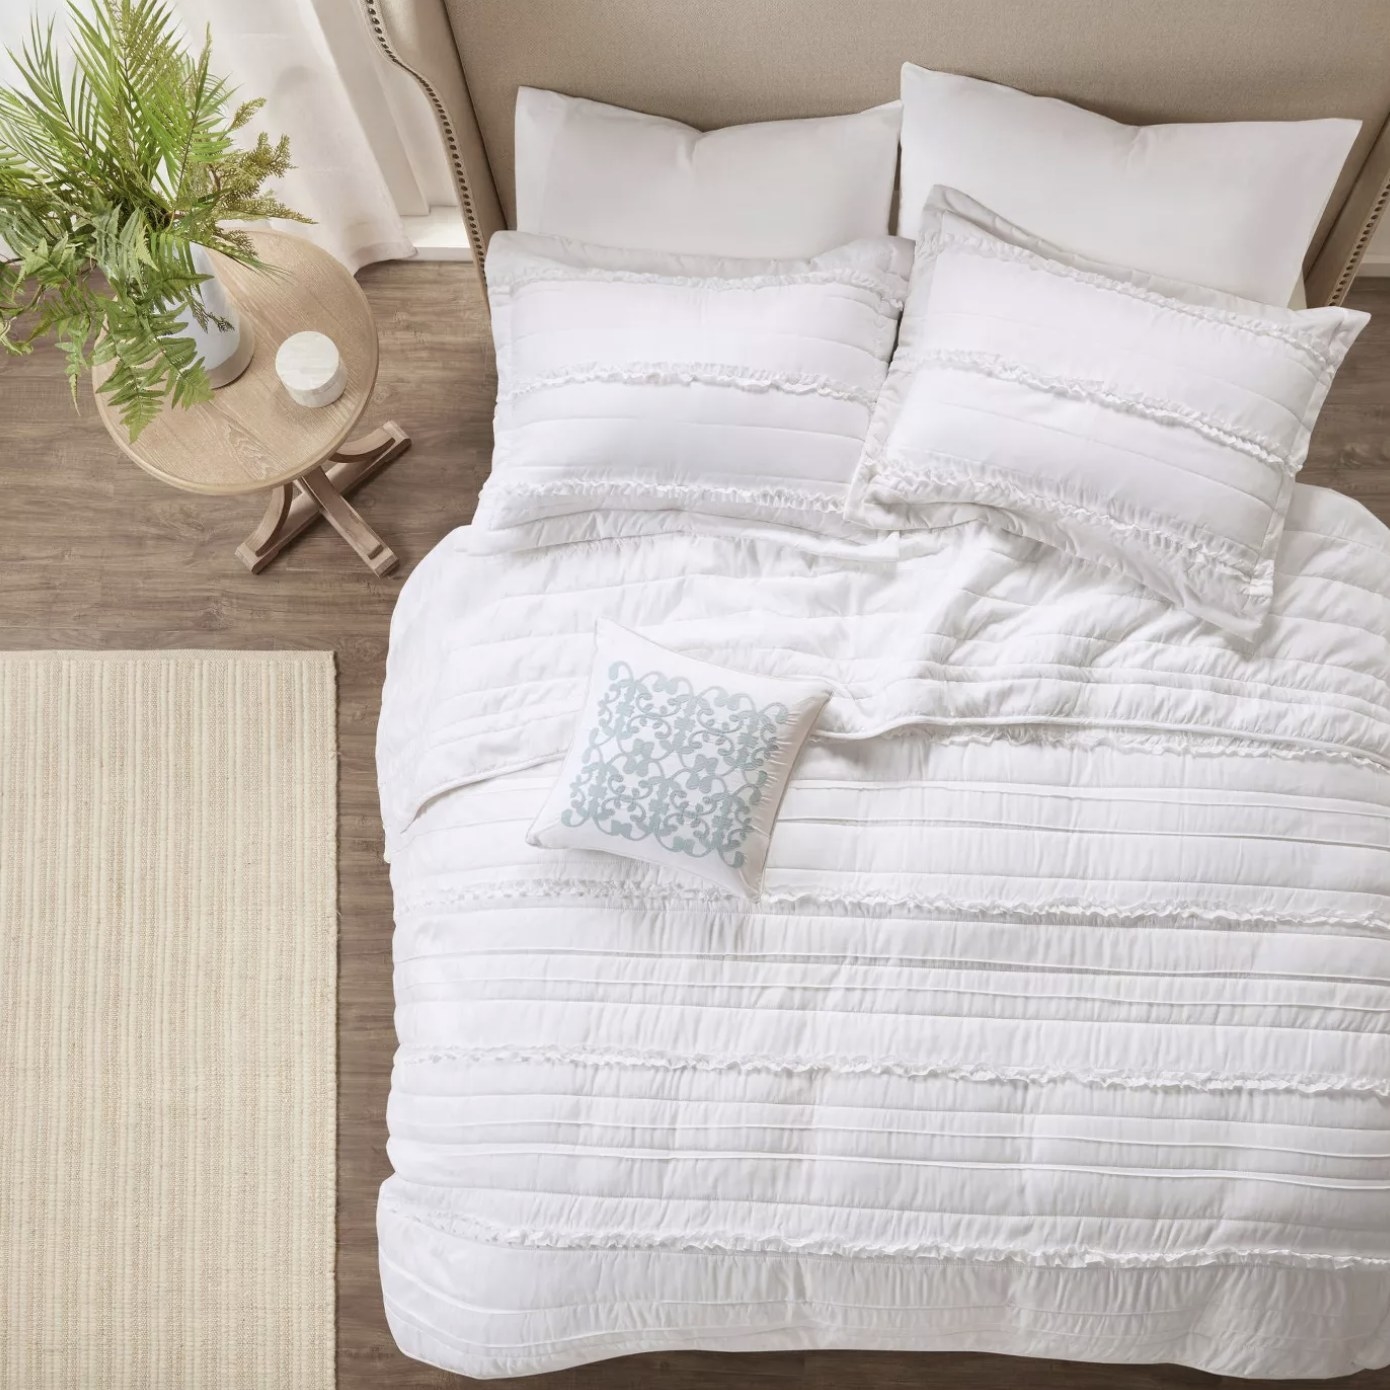 The white comforter has multiple vertical stitches, ruffles and a embroidered pillow